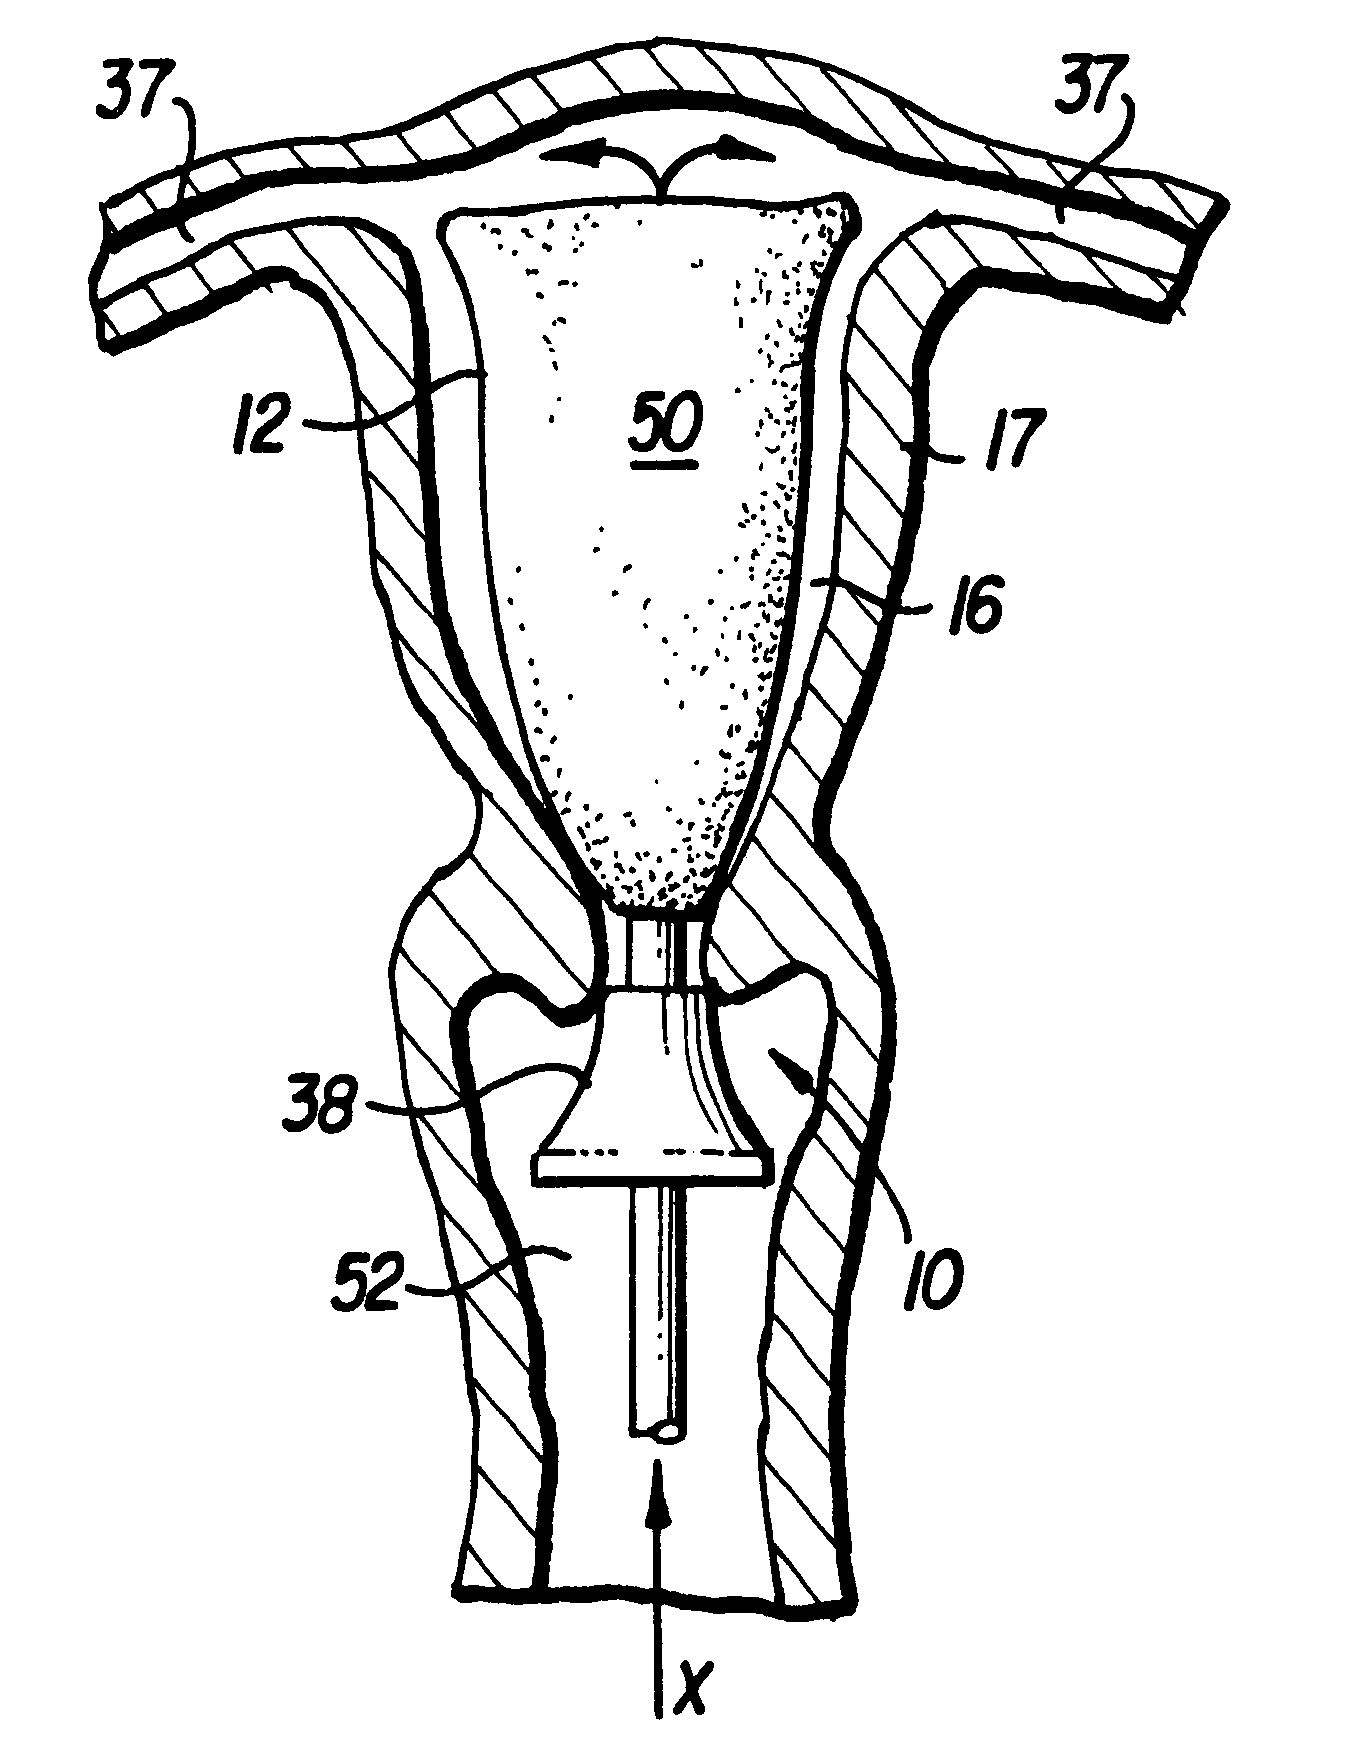 Apparatus and method for delivering and deploying an expandable body member in a uterine cavity